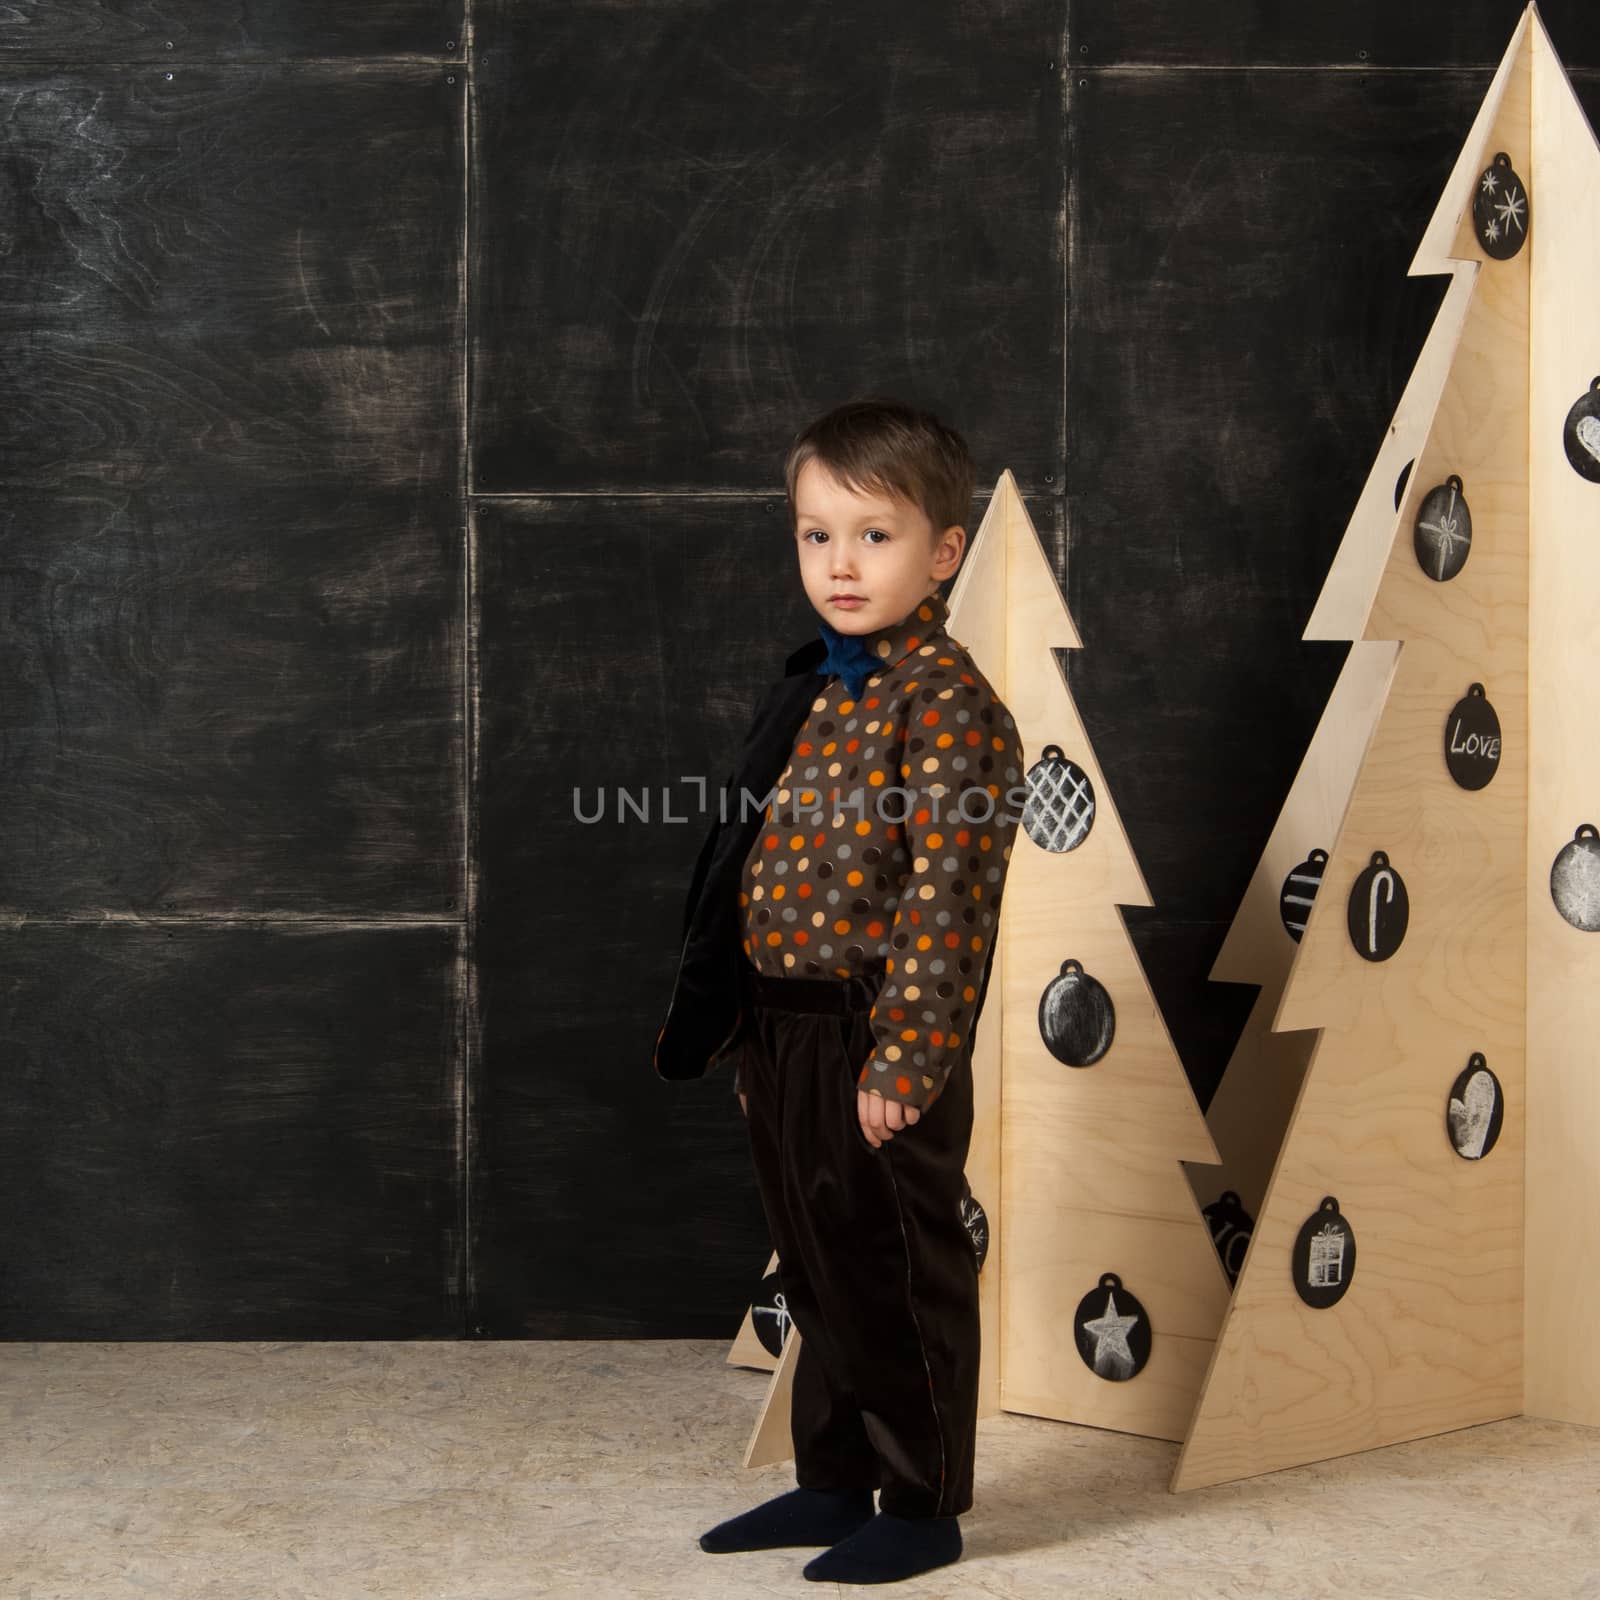 the little boy next to decorative Christmas trees by A_Karim